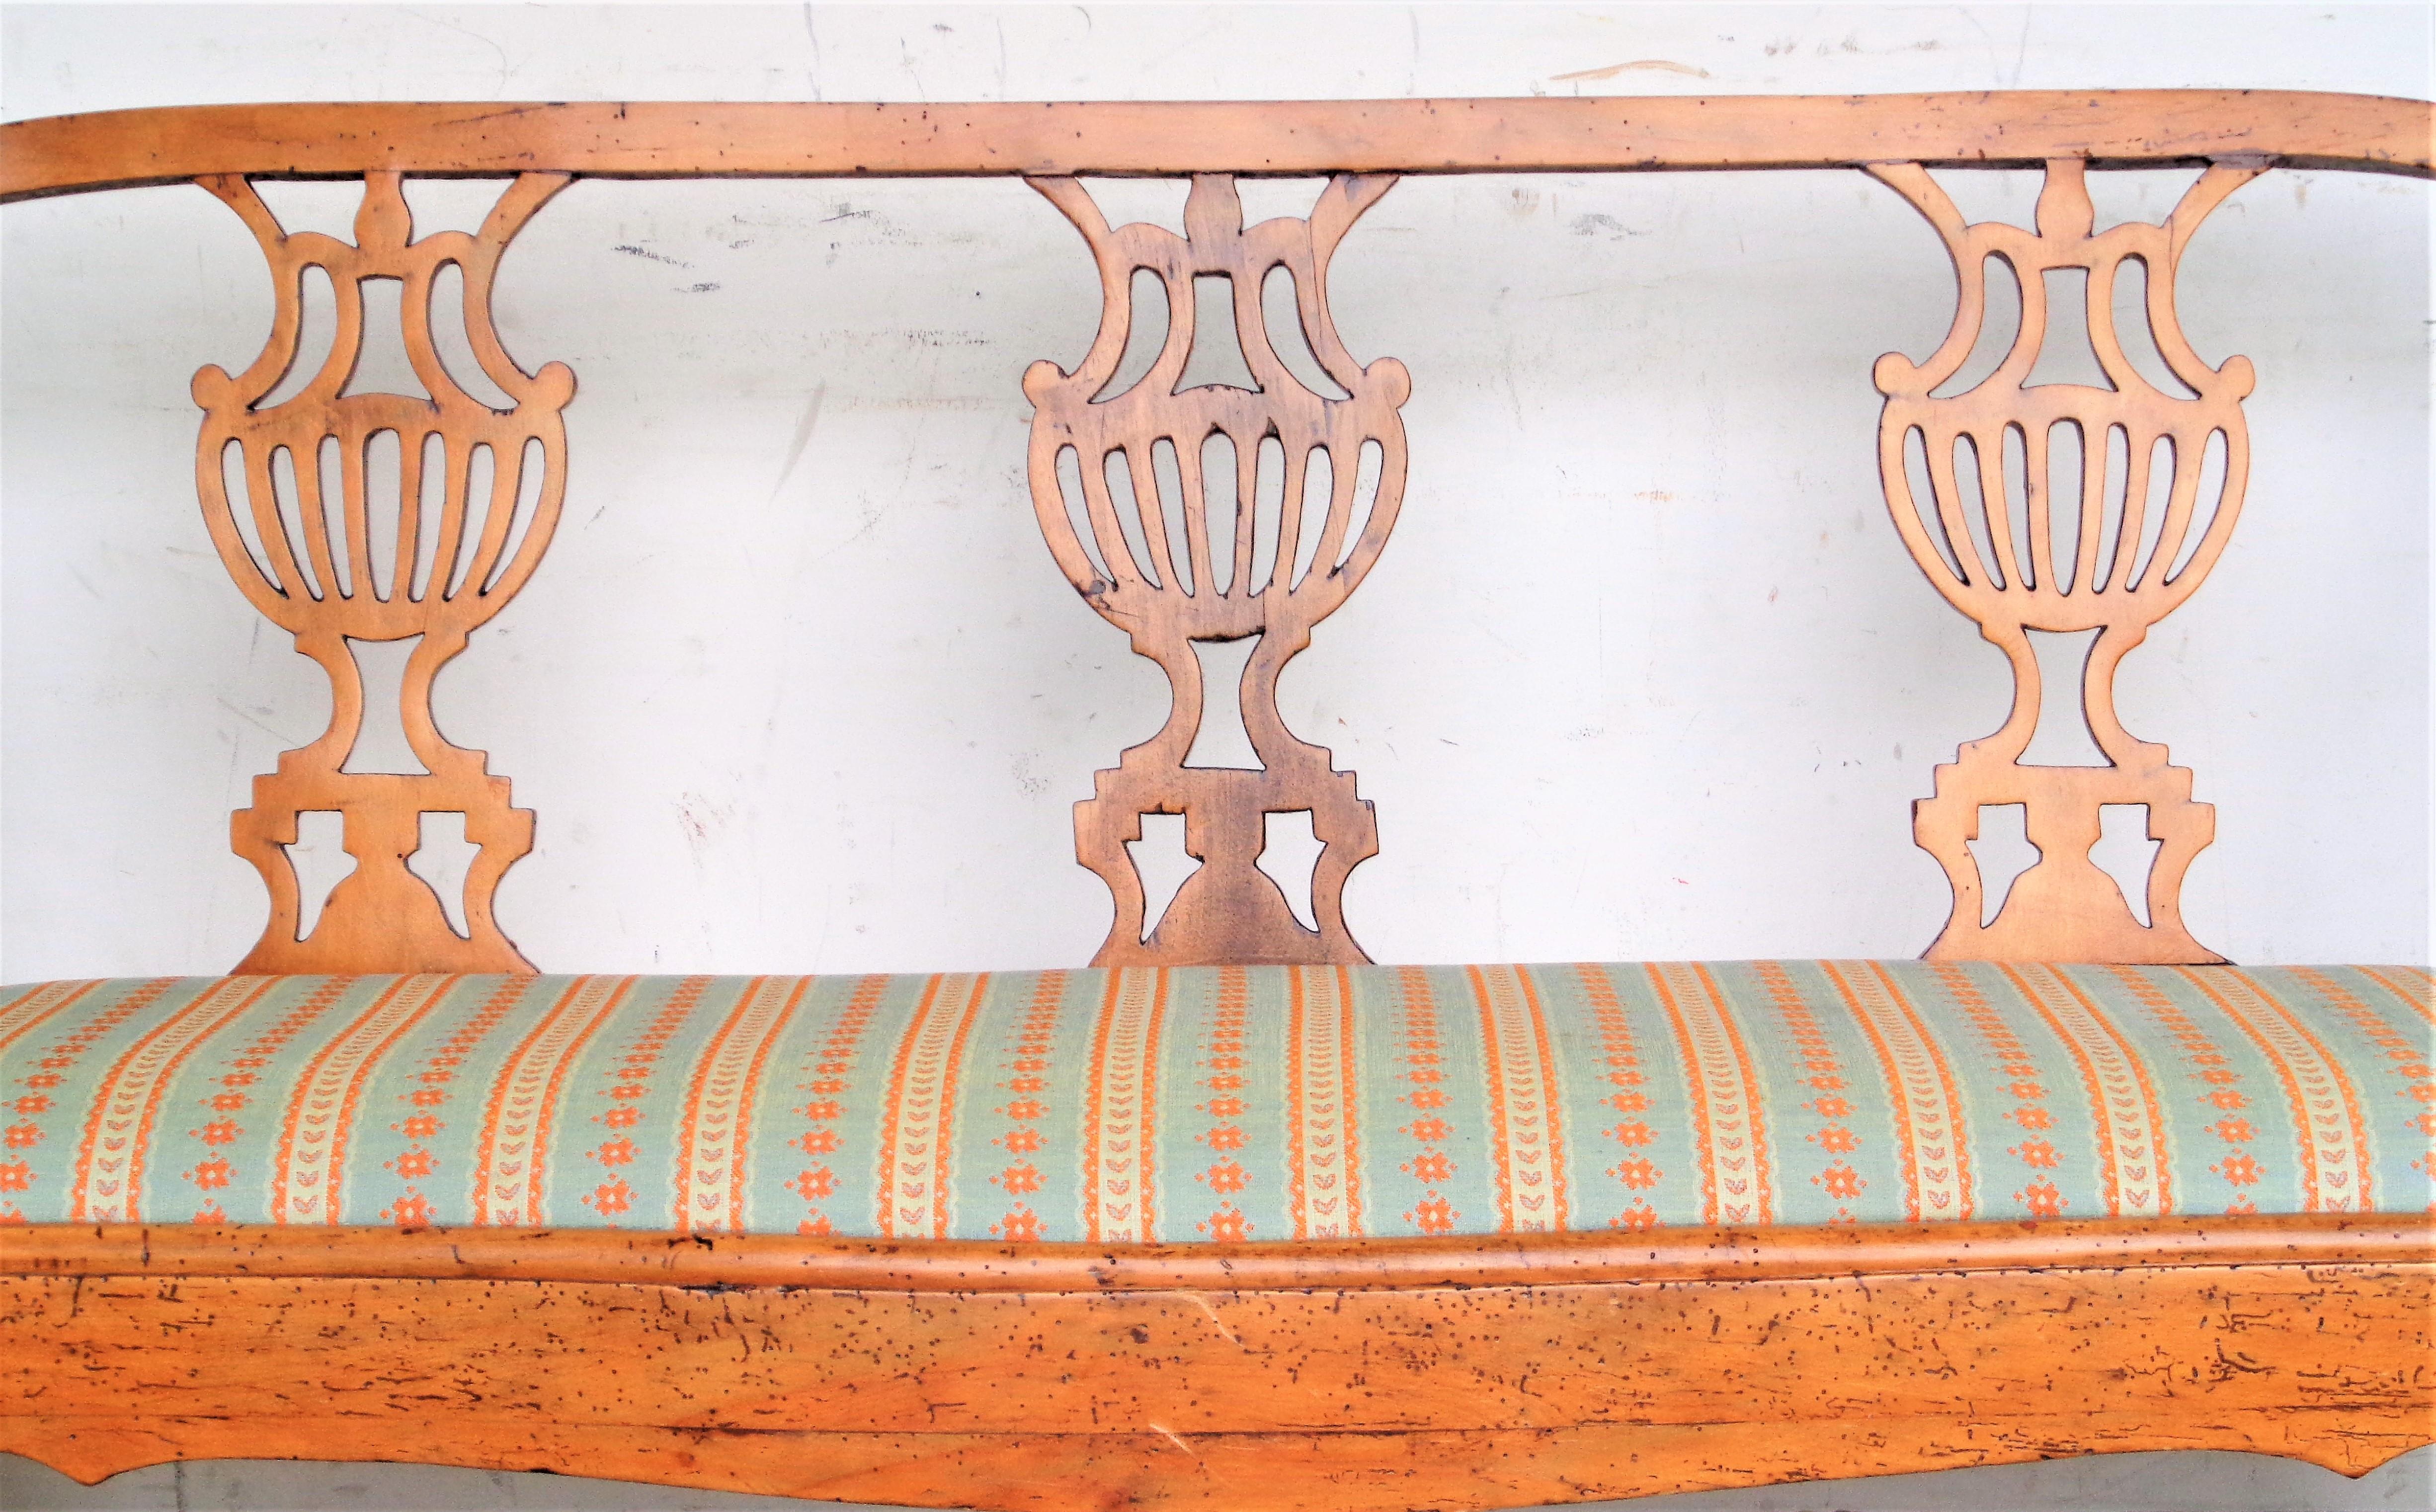 Antique 18th century Scandinavian carved fruit wood settee ( Sweden or Denmark in origin ) with early period joinery construction and beautiful glowing warm surface colors. Circa 1780. Look at all pictures and read condition report in comment